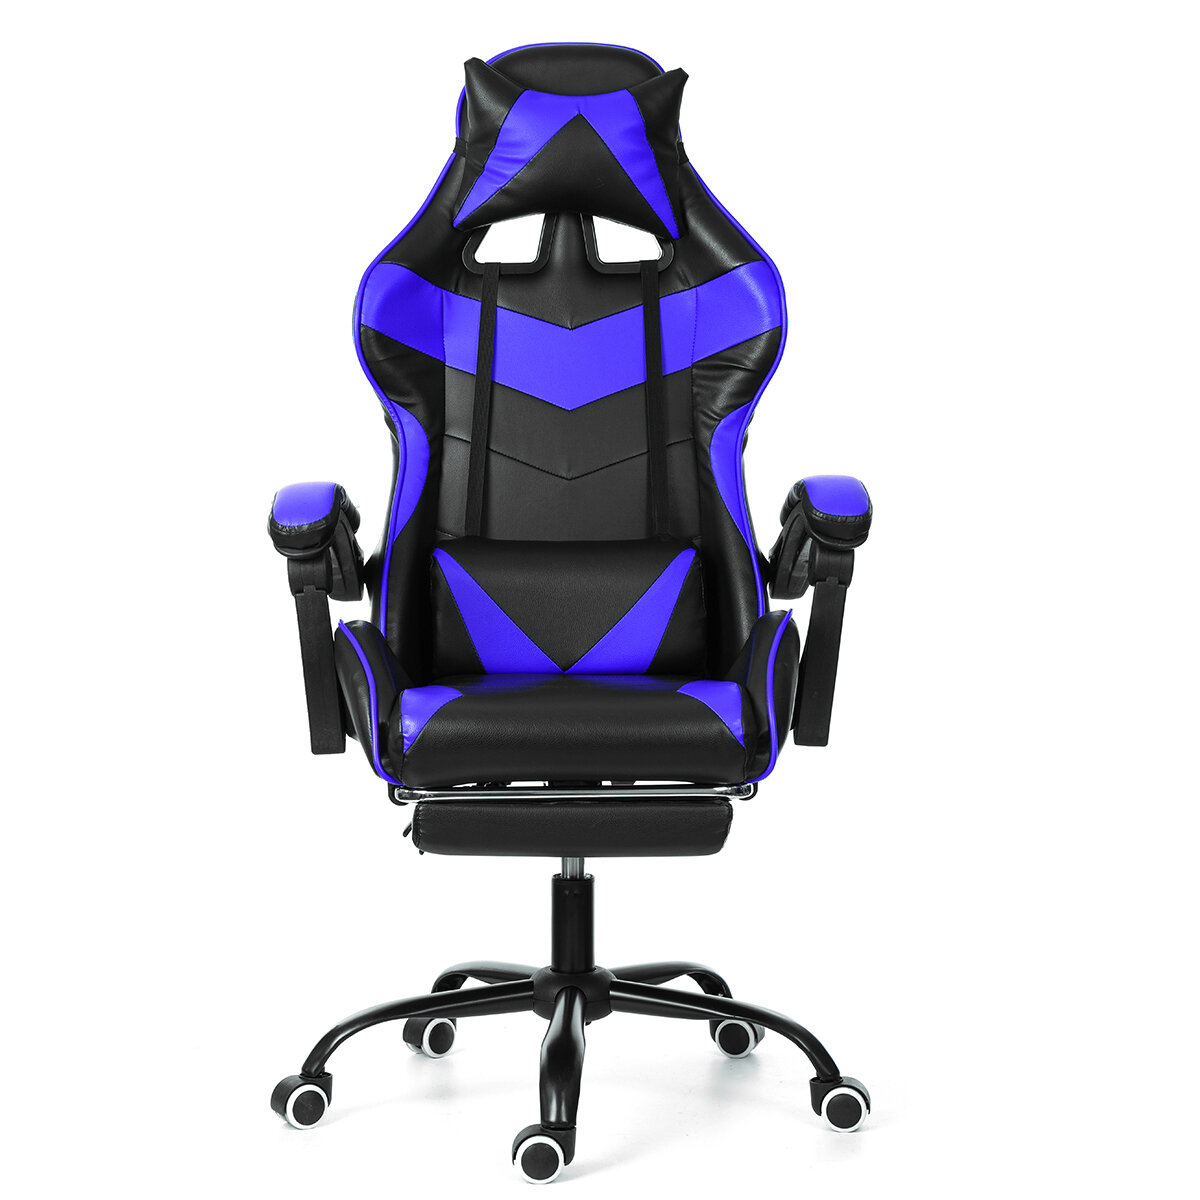 Hoffree Ergonomic High Back Racing Chair Reclining Office Chair Adjustable Height Rotating Lift Chair PU Leather Gaming